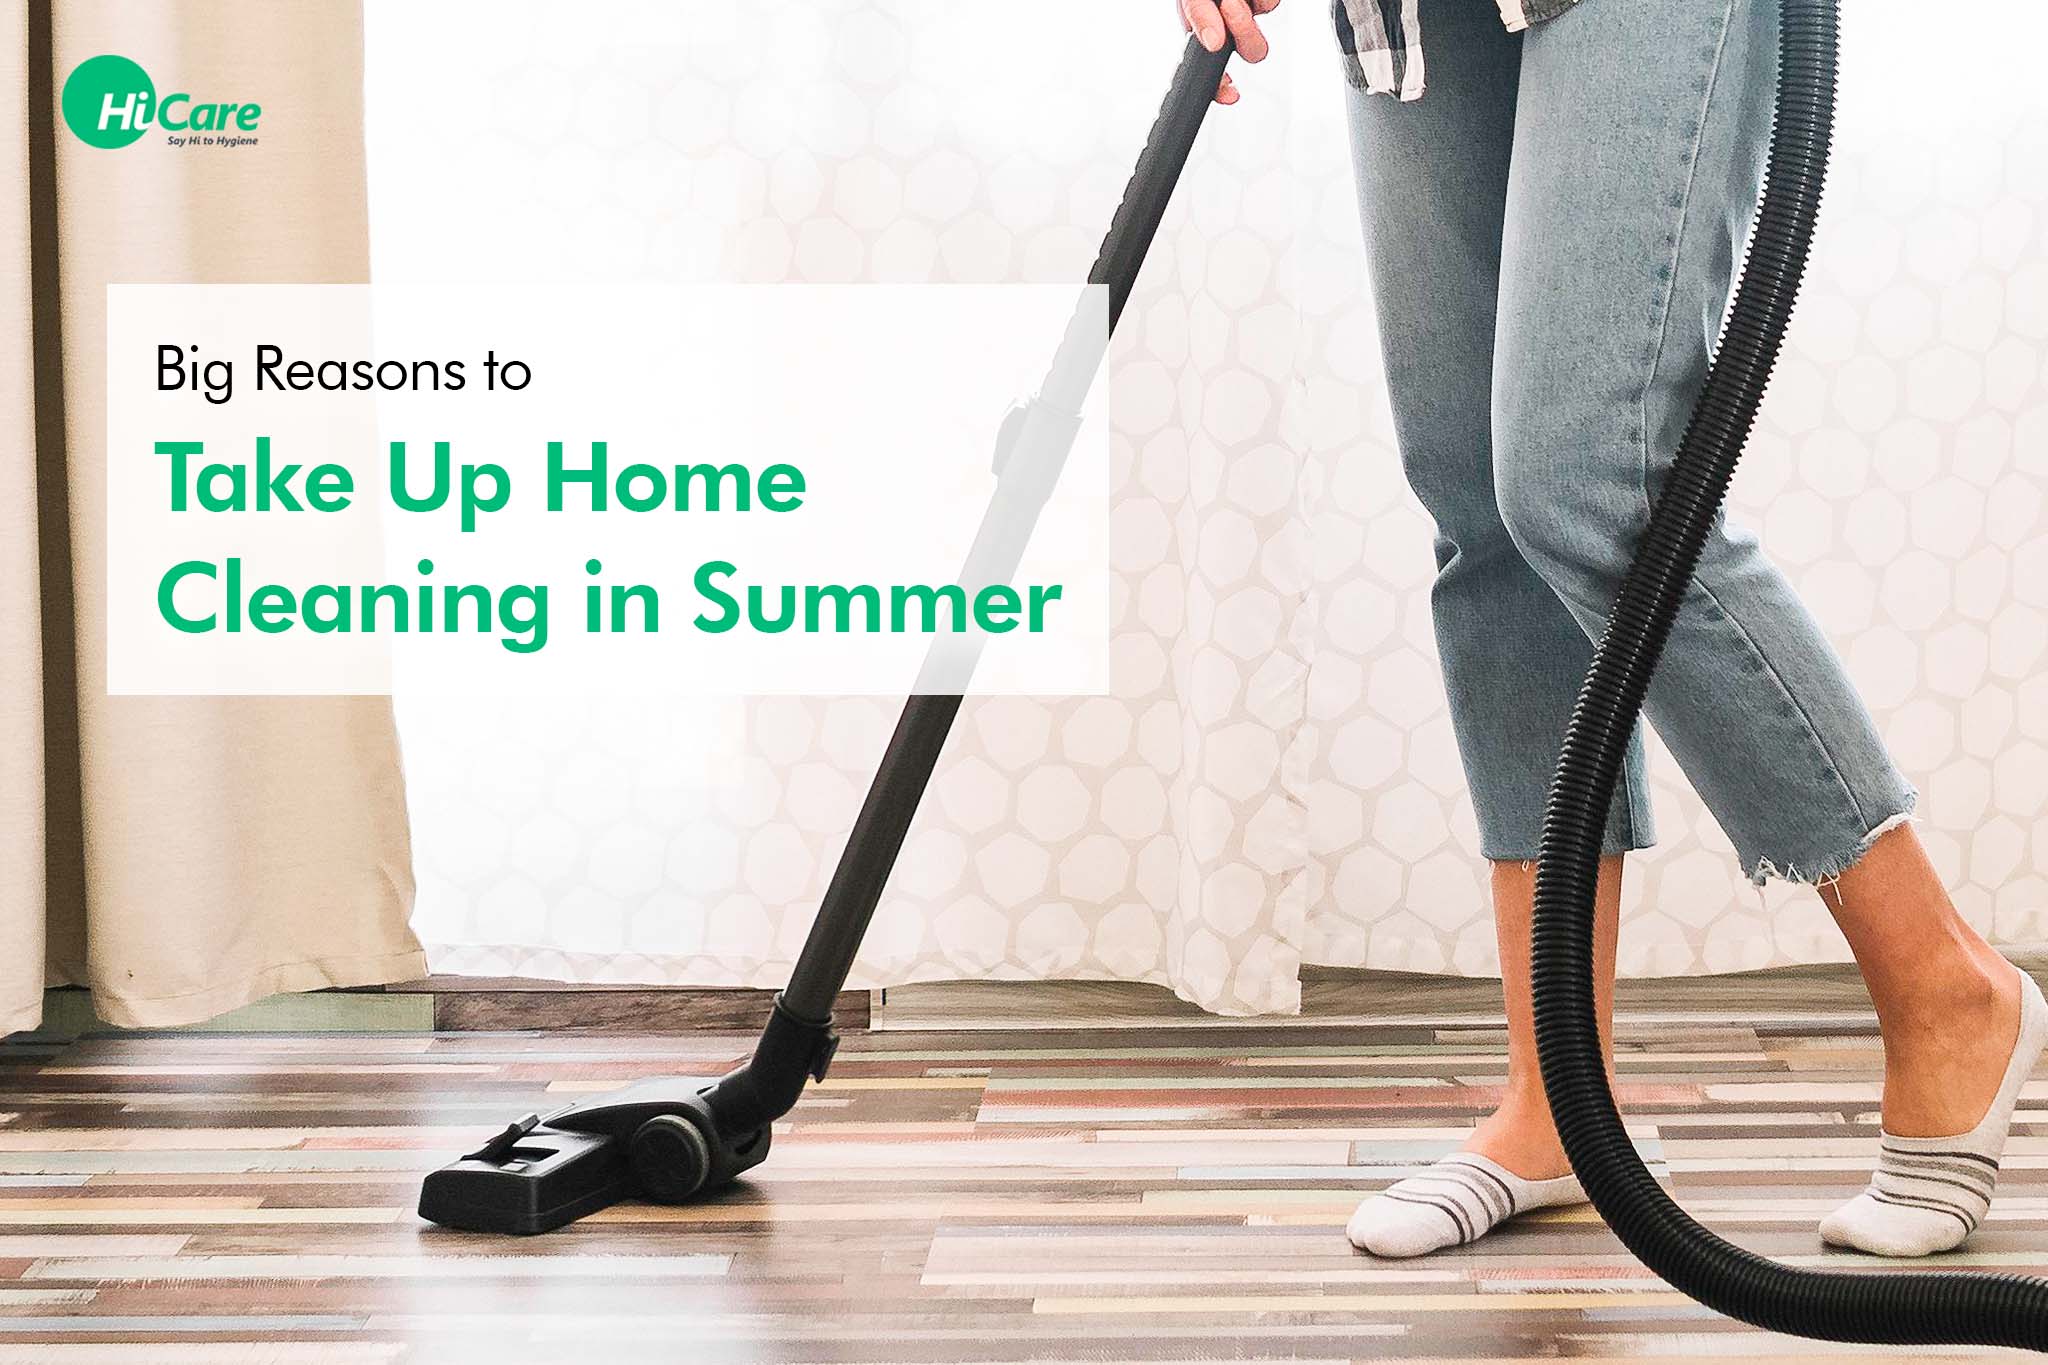 15 Big Reasons to Take Up Home Cleaning in Summer | HiCare